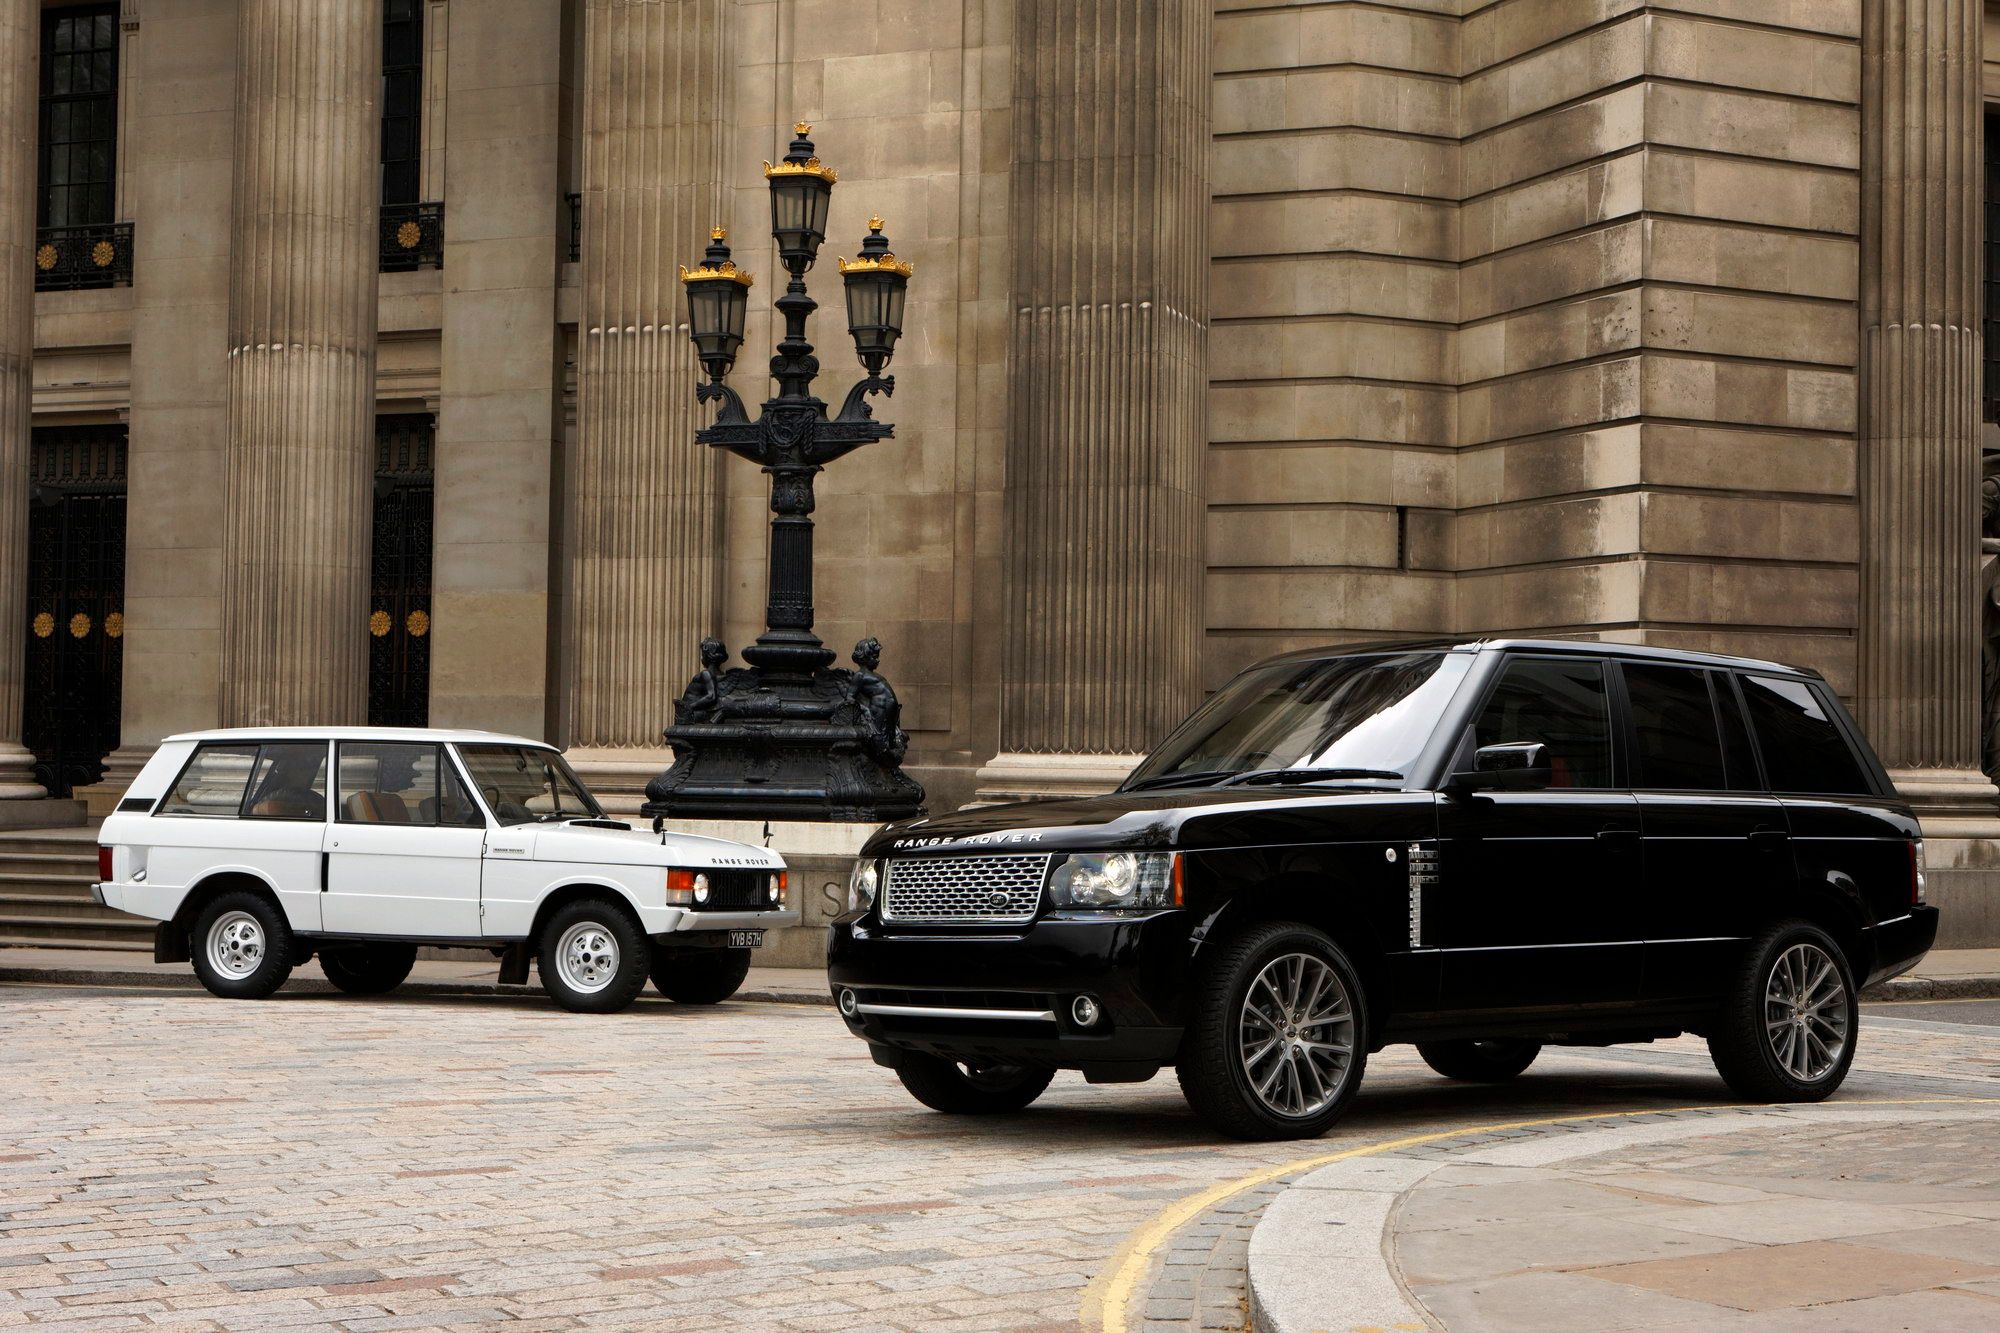 2010 Range Rover Autobiography Black Limited Edition